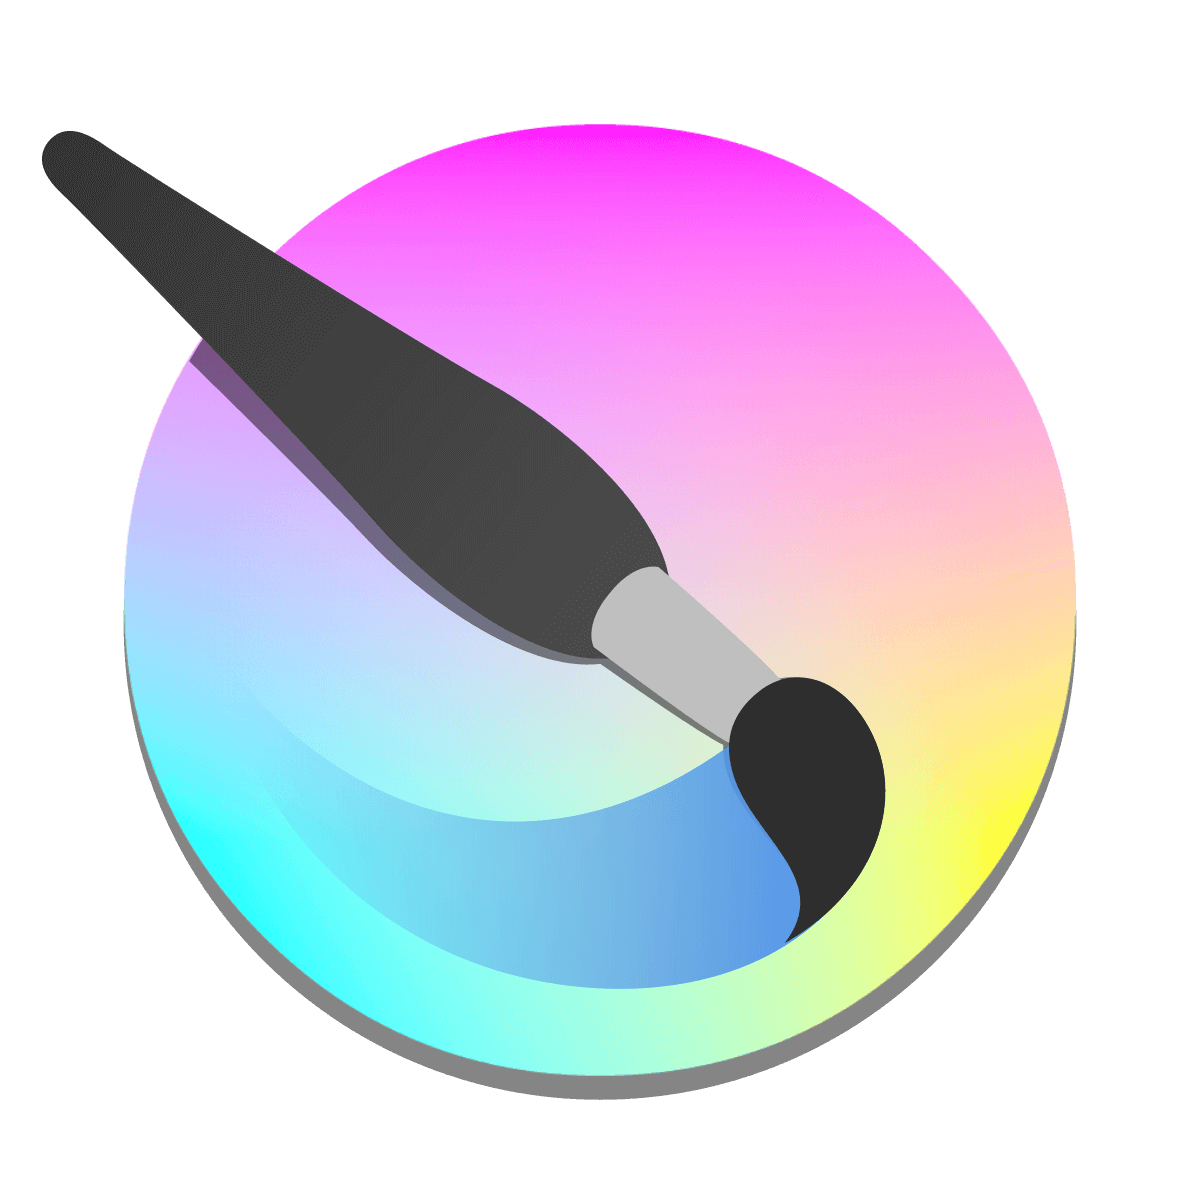 An app for drawing